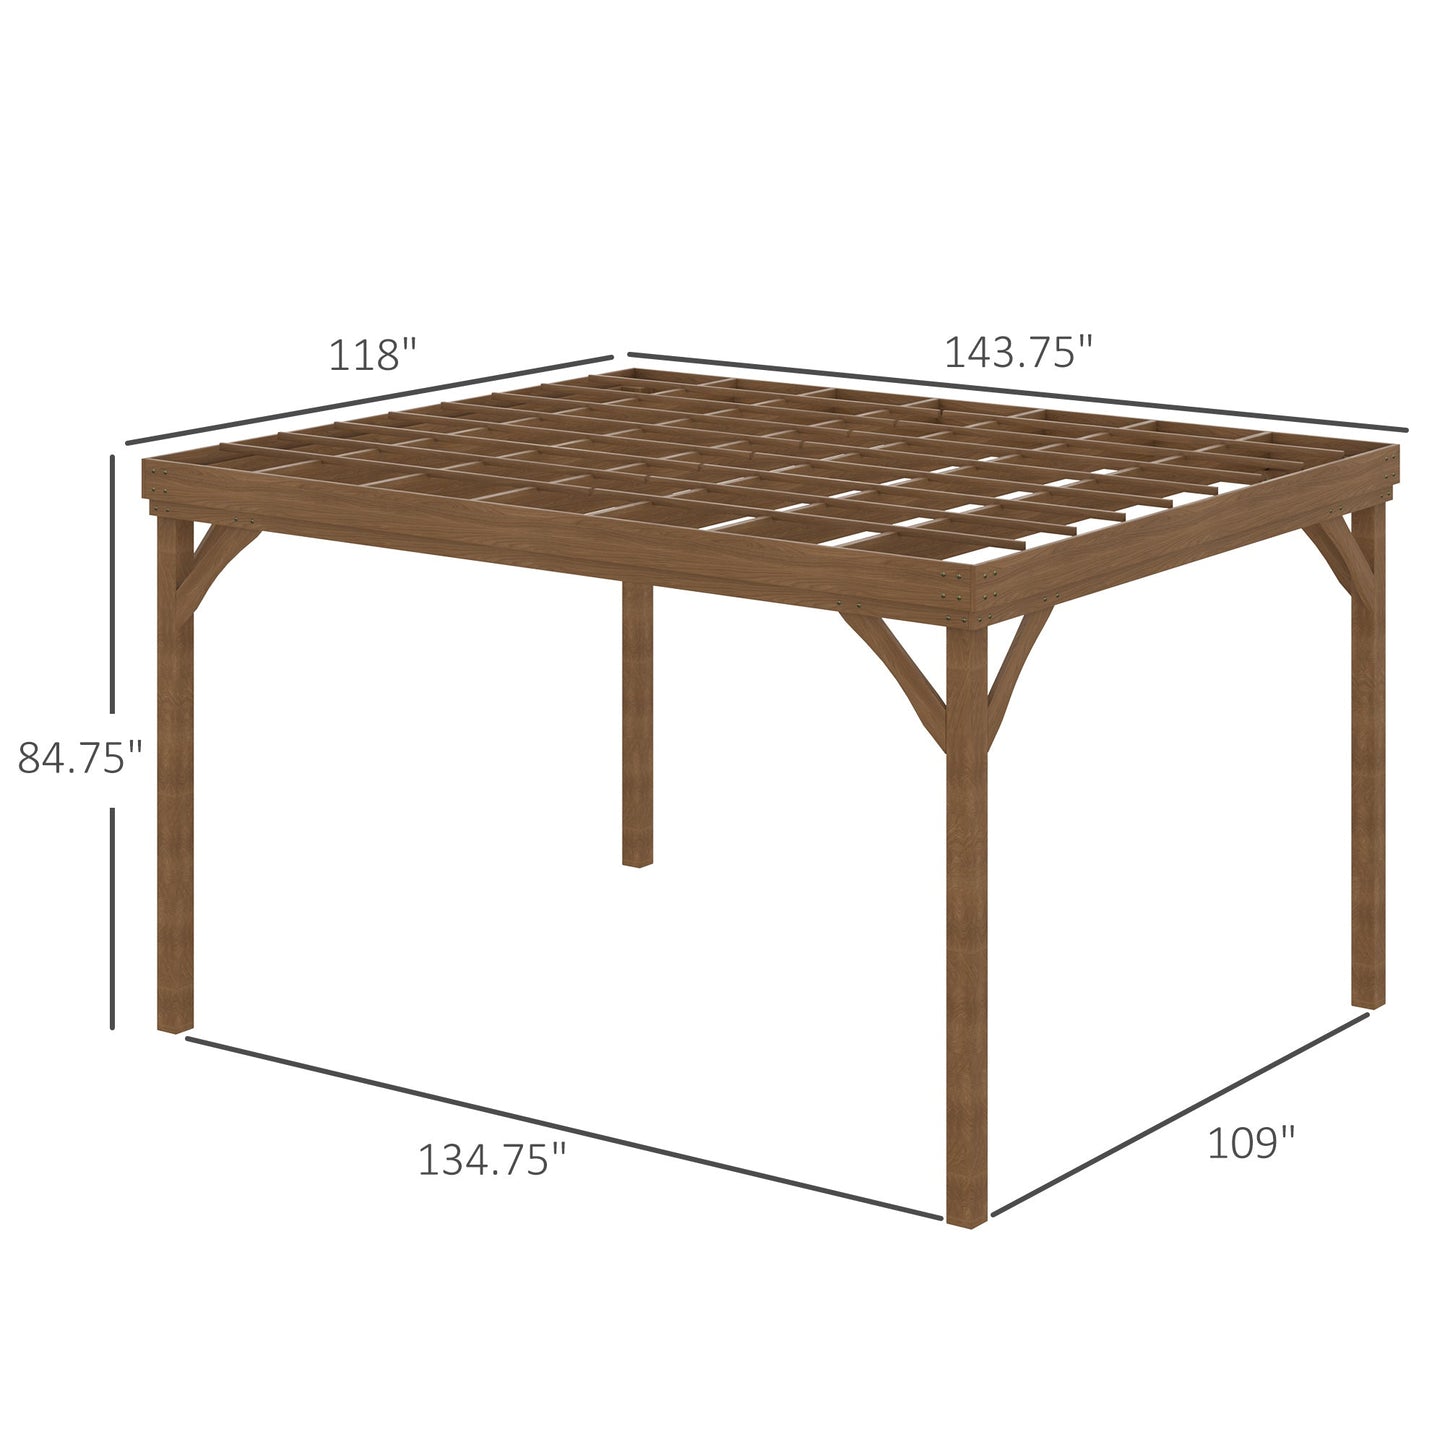 -Outsunny 10' x 12' Outdoor Pergola, Wood Gazebo Grape Trellis with Stable Structure and Concrete Anchors, for Garden, Patio, Backyard, Deck - Outdoor Style Company